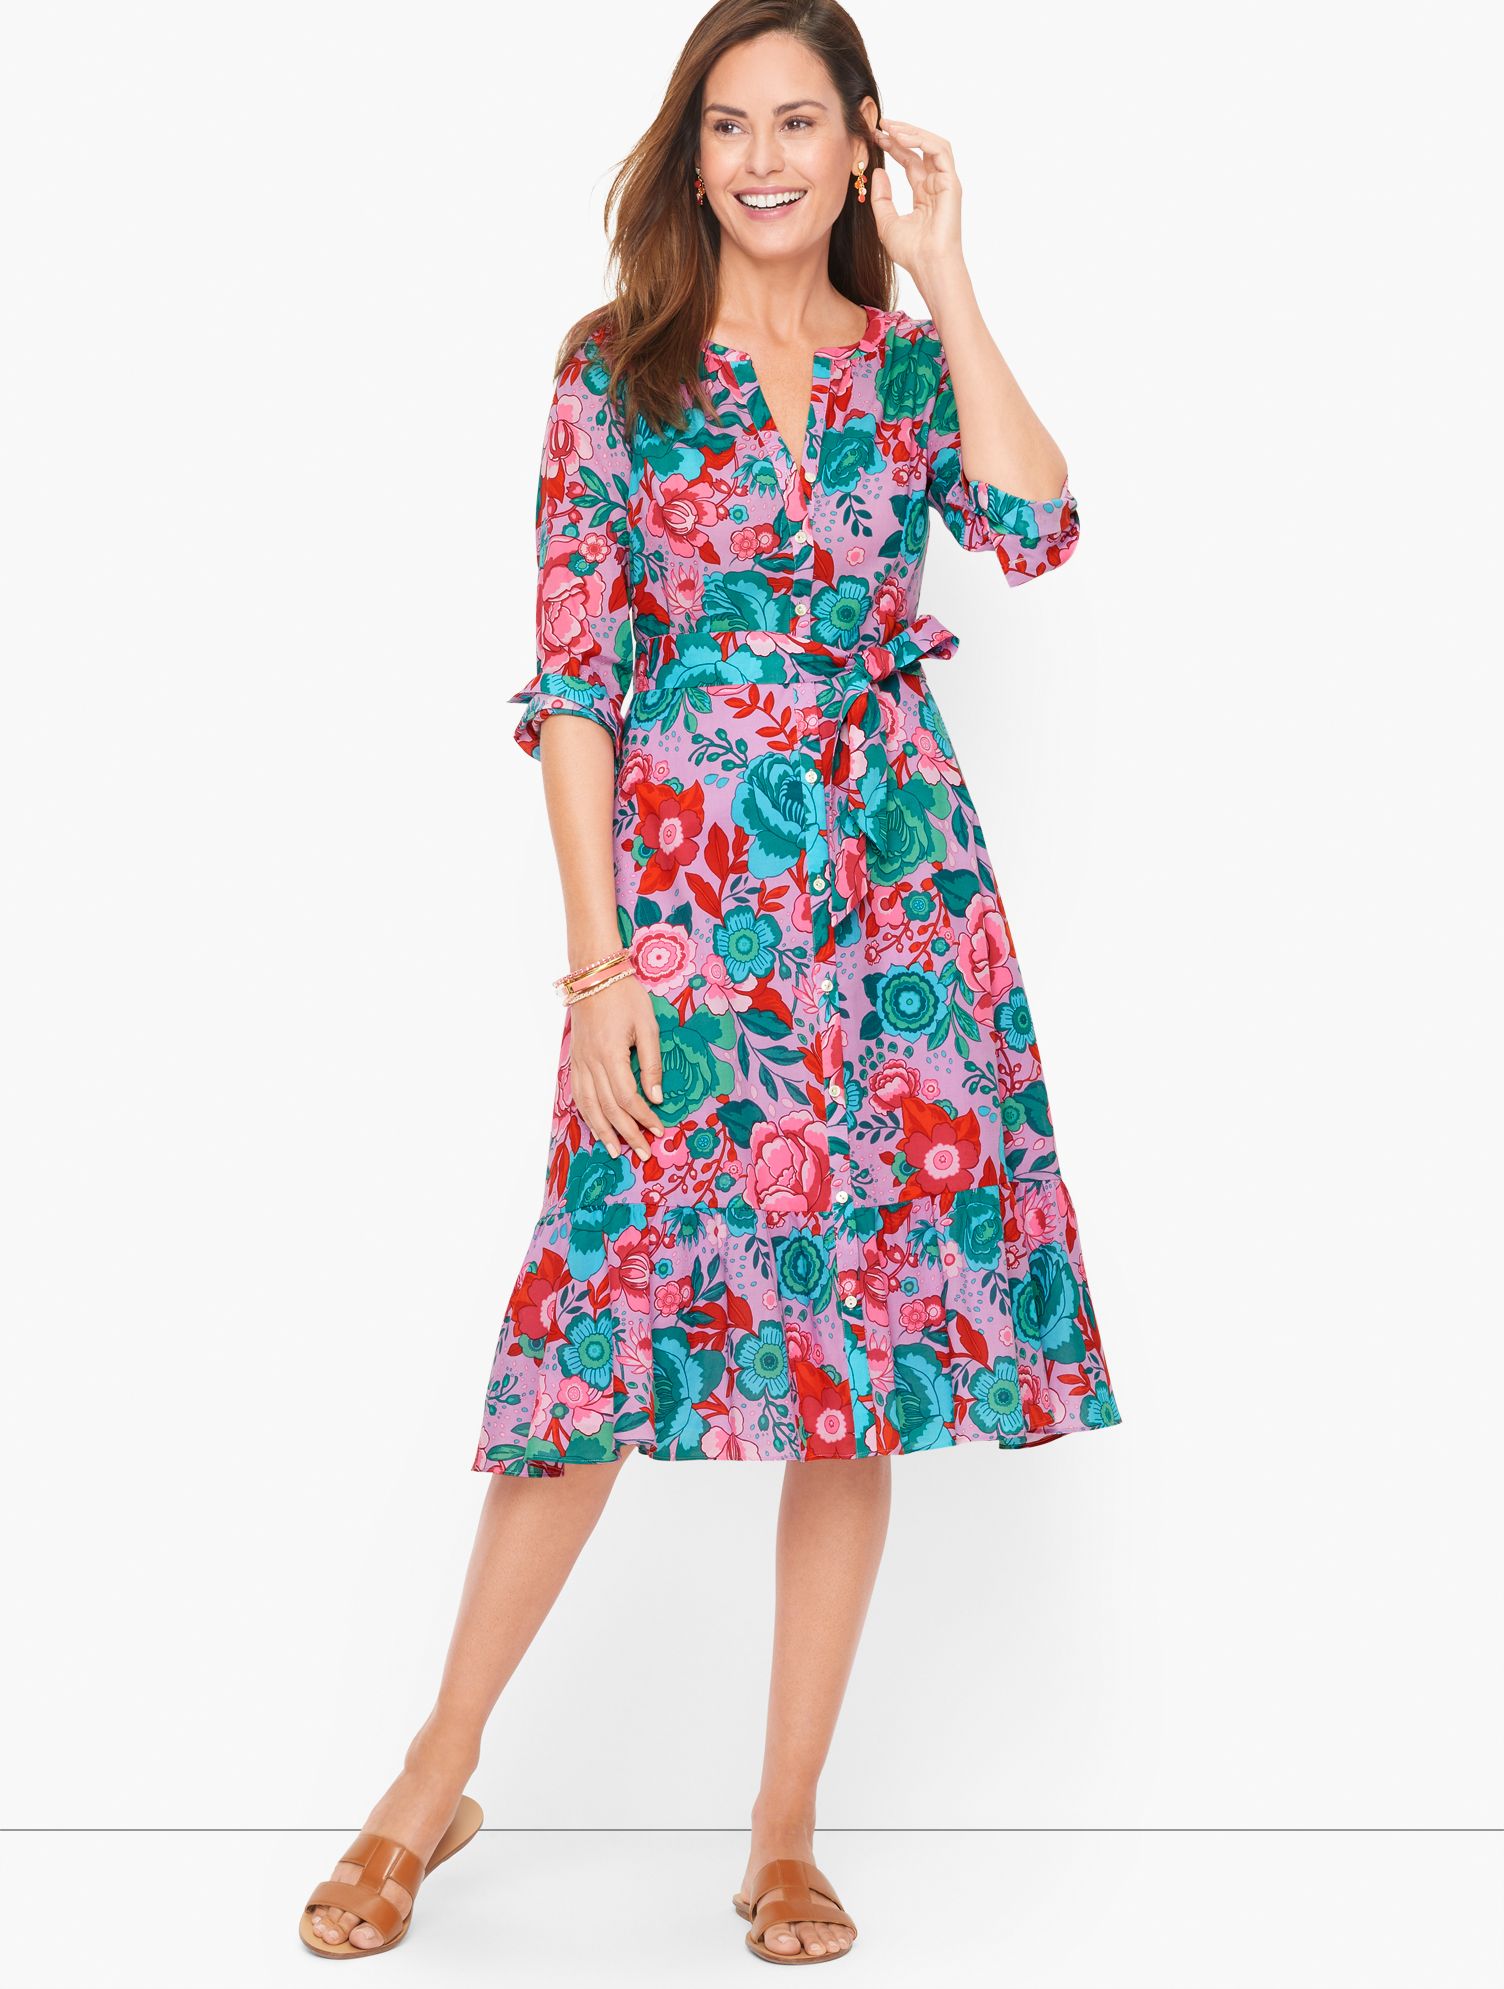 Belted Shirtdress - Sketched Blooms - Violet Tulle - 4 - 100% Cotton Talbots | Talbots